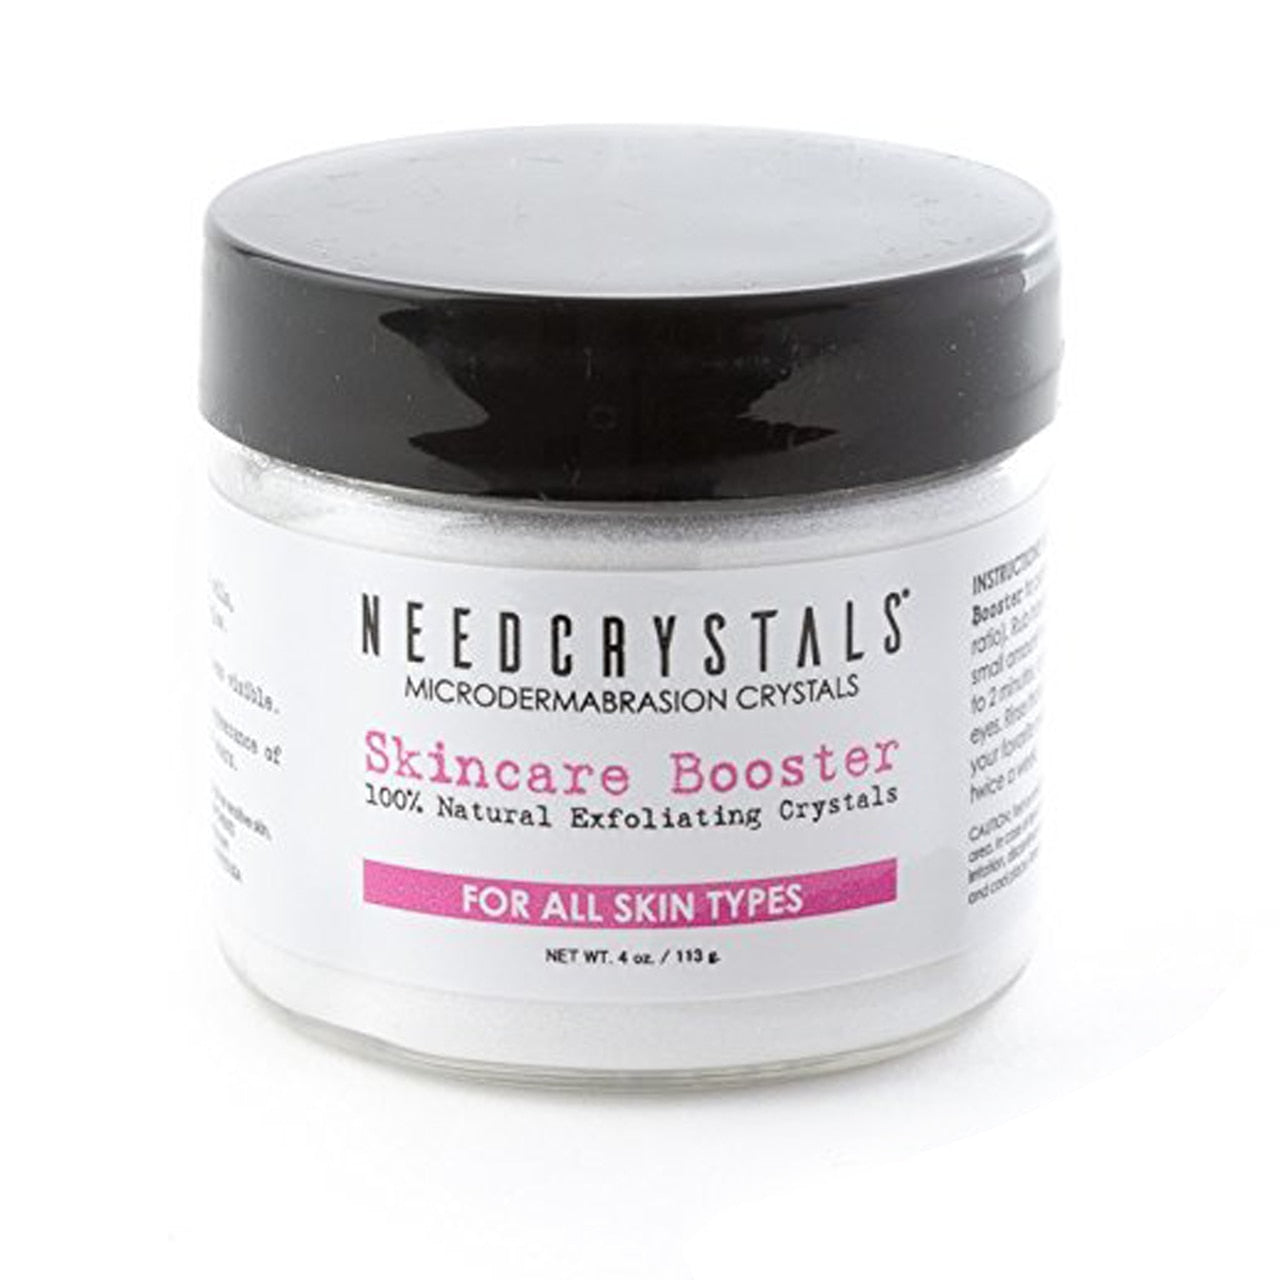 NeedCrystals Microdermabrasion Crystals Skincare Booster